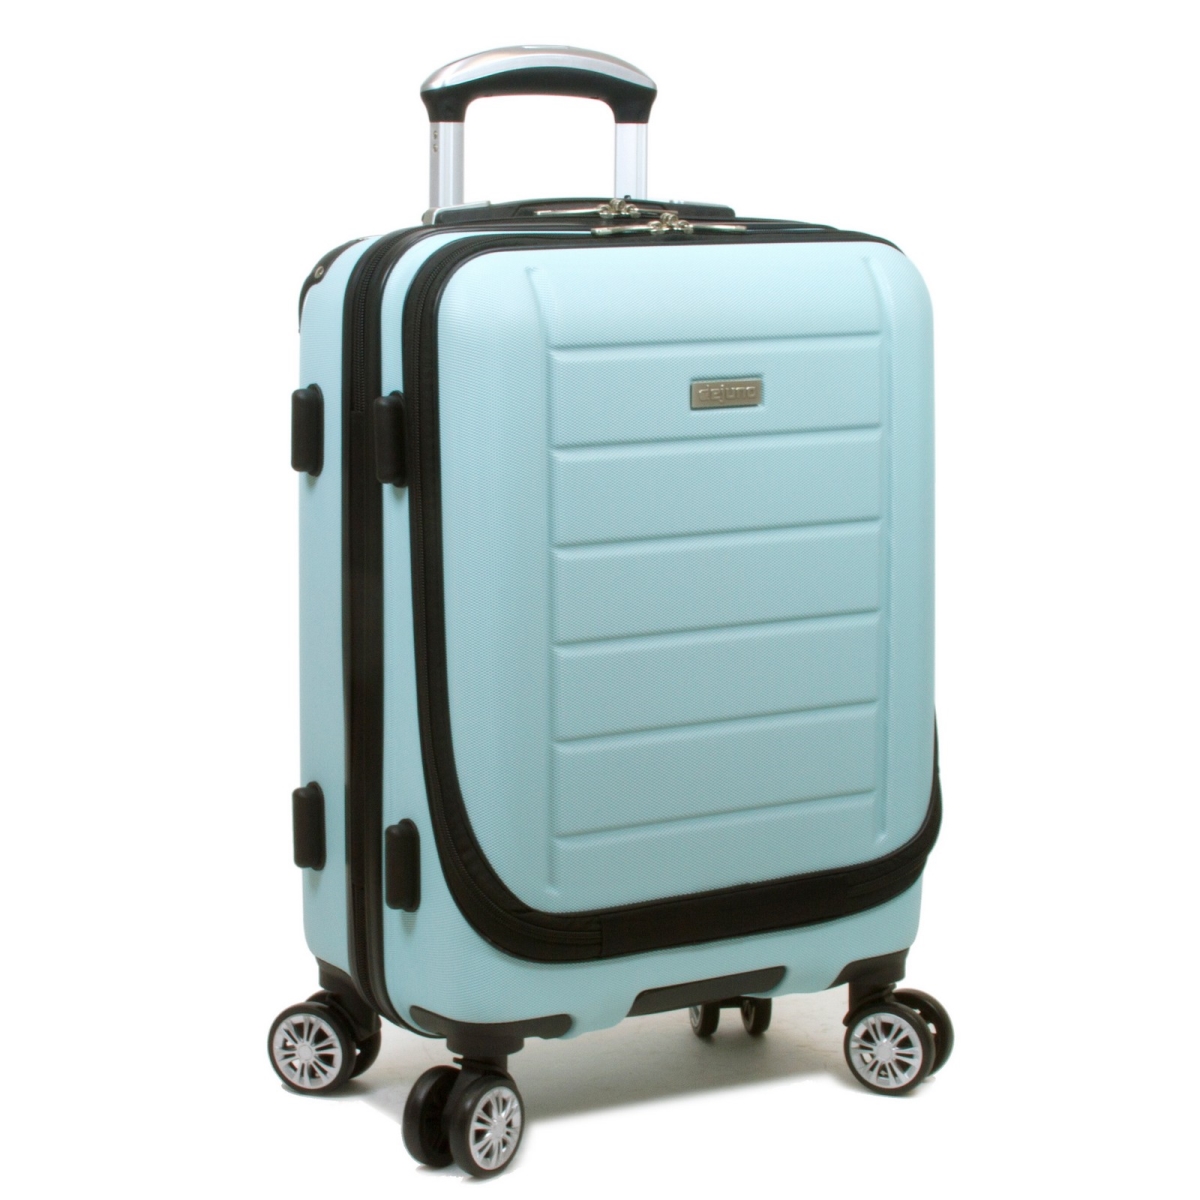 25dj-9902-sky Blue 20 In. Compact Hardside Carry-on Luggage With Laptop Pocket, Sky Blue